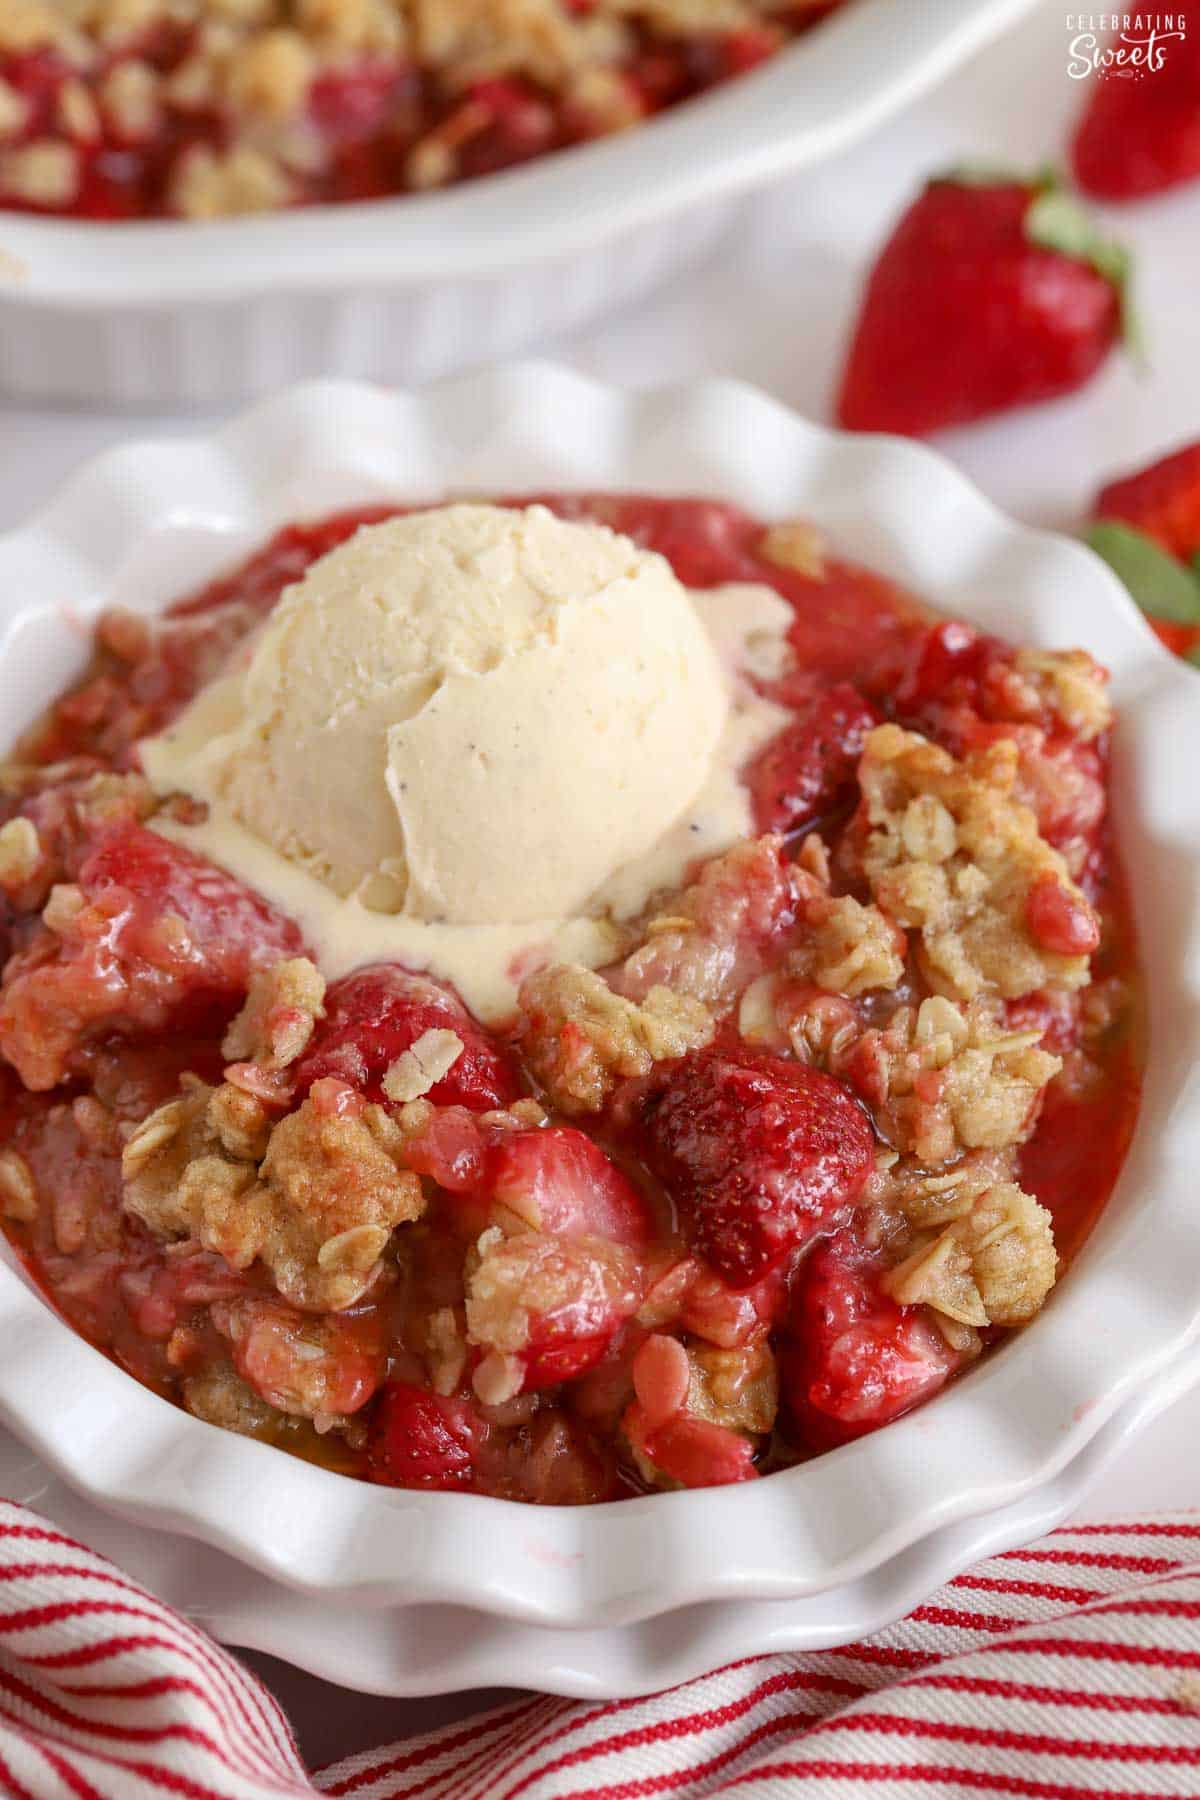 Strawberry crisp in a white bowl topped with ice cream.